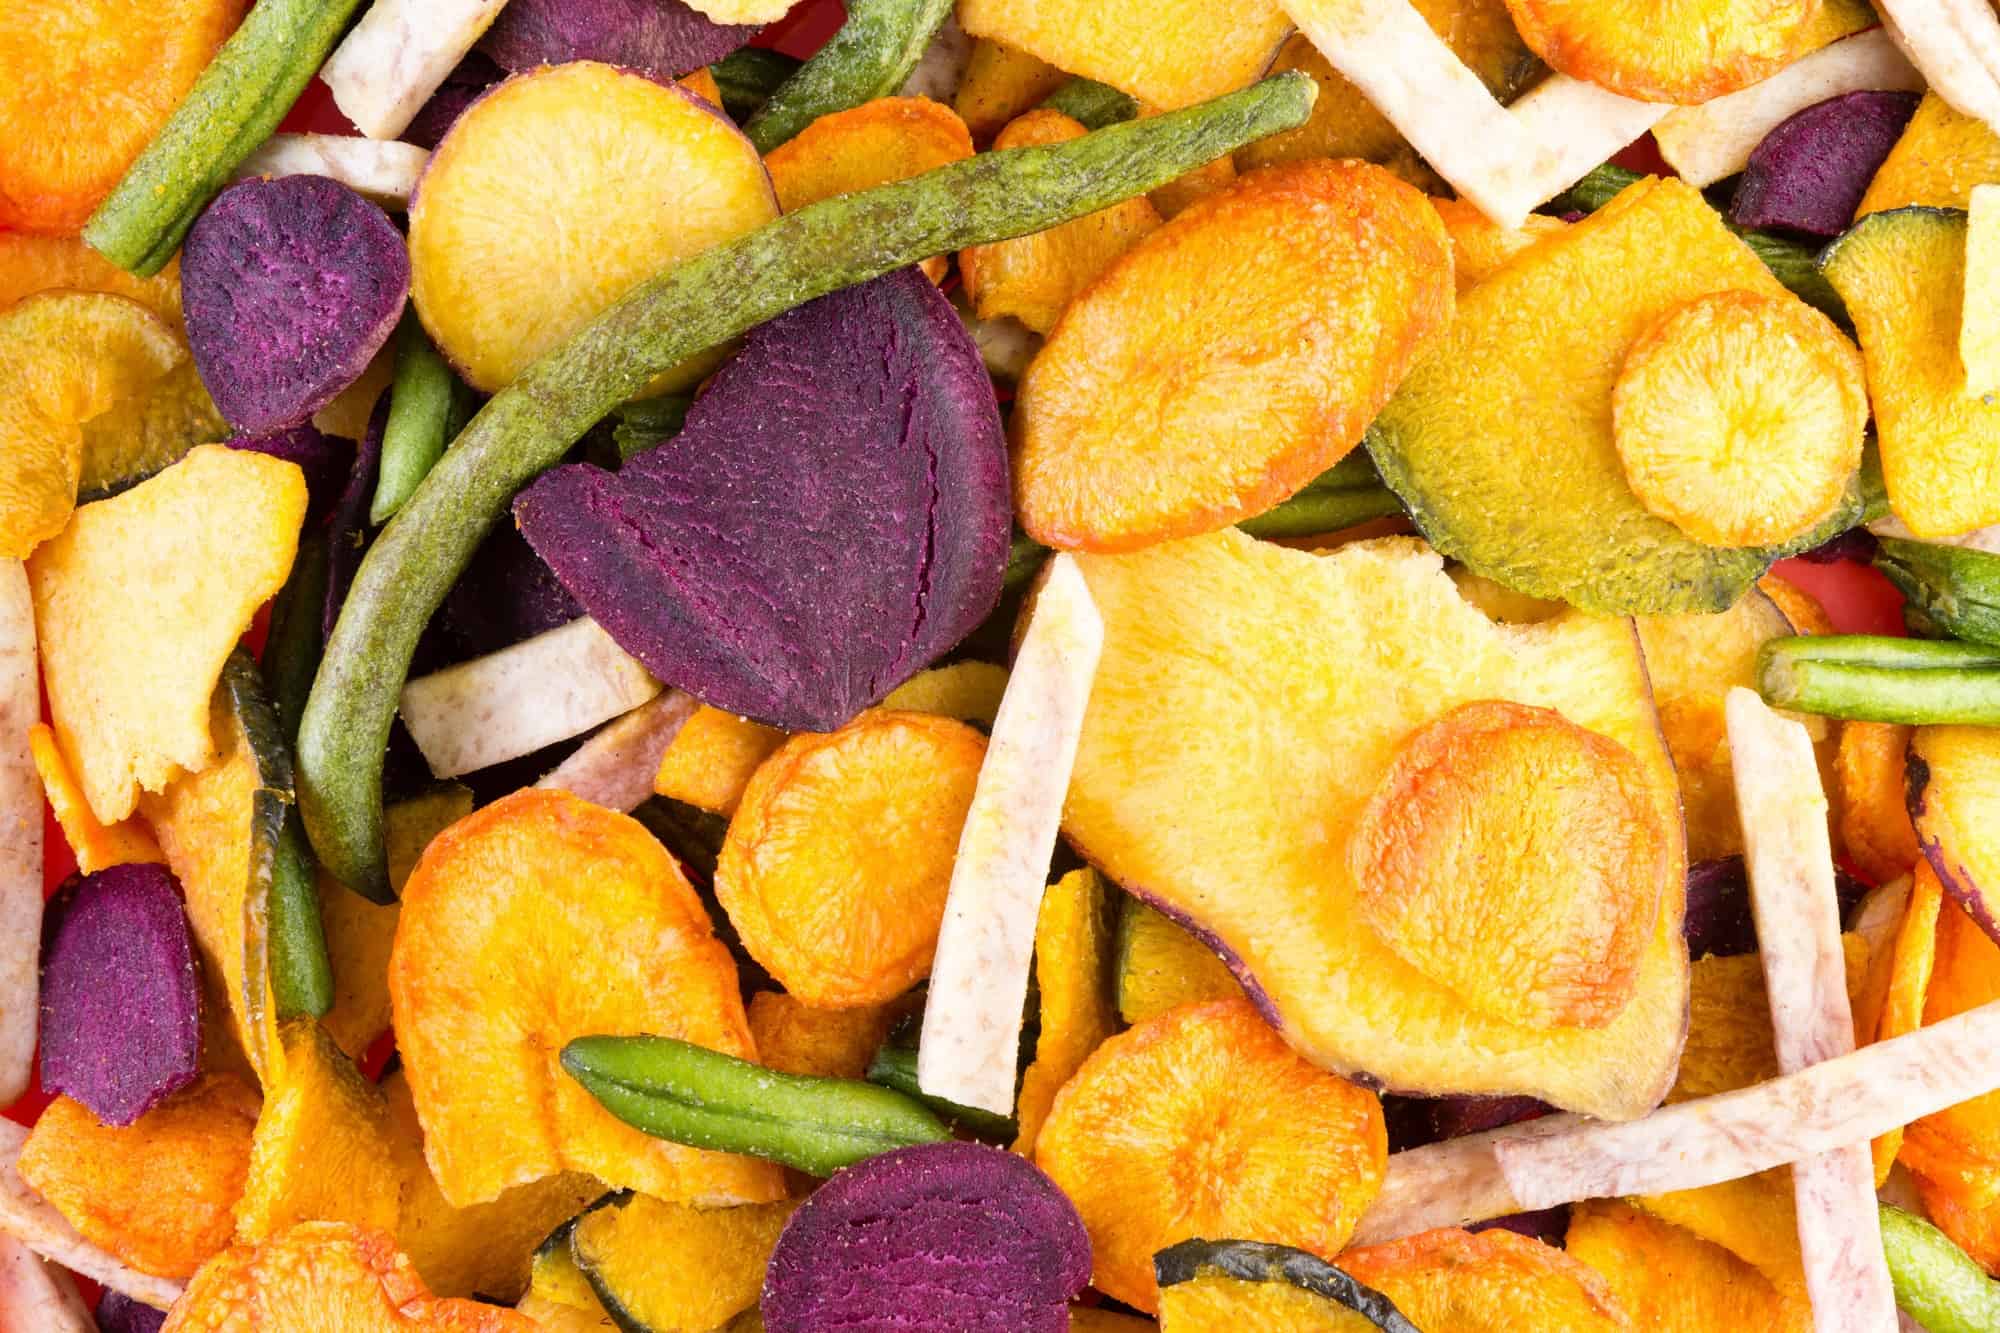 How To Store Dehydrated Vegetables